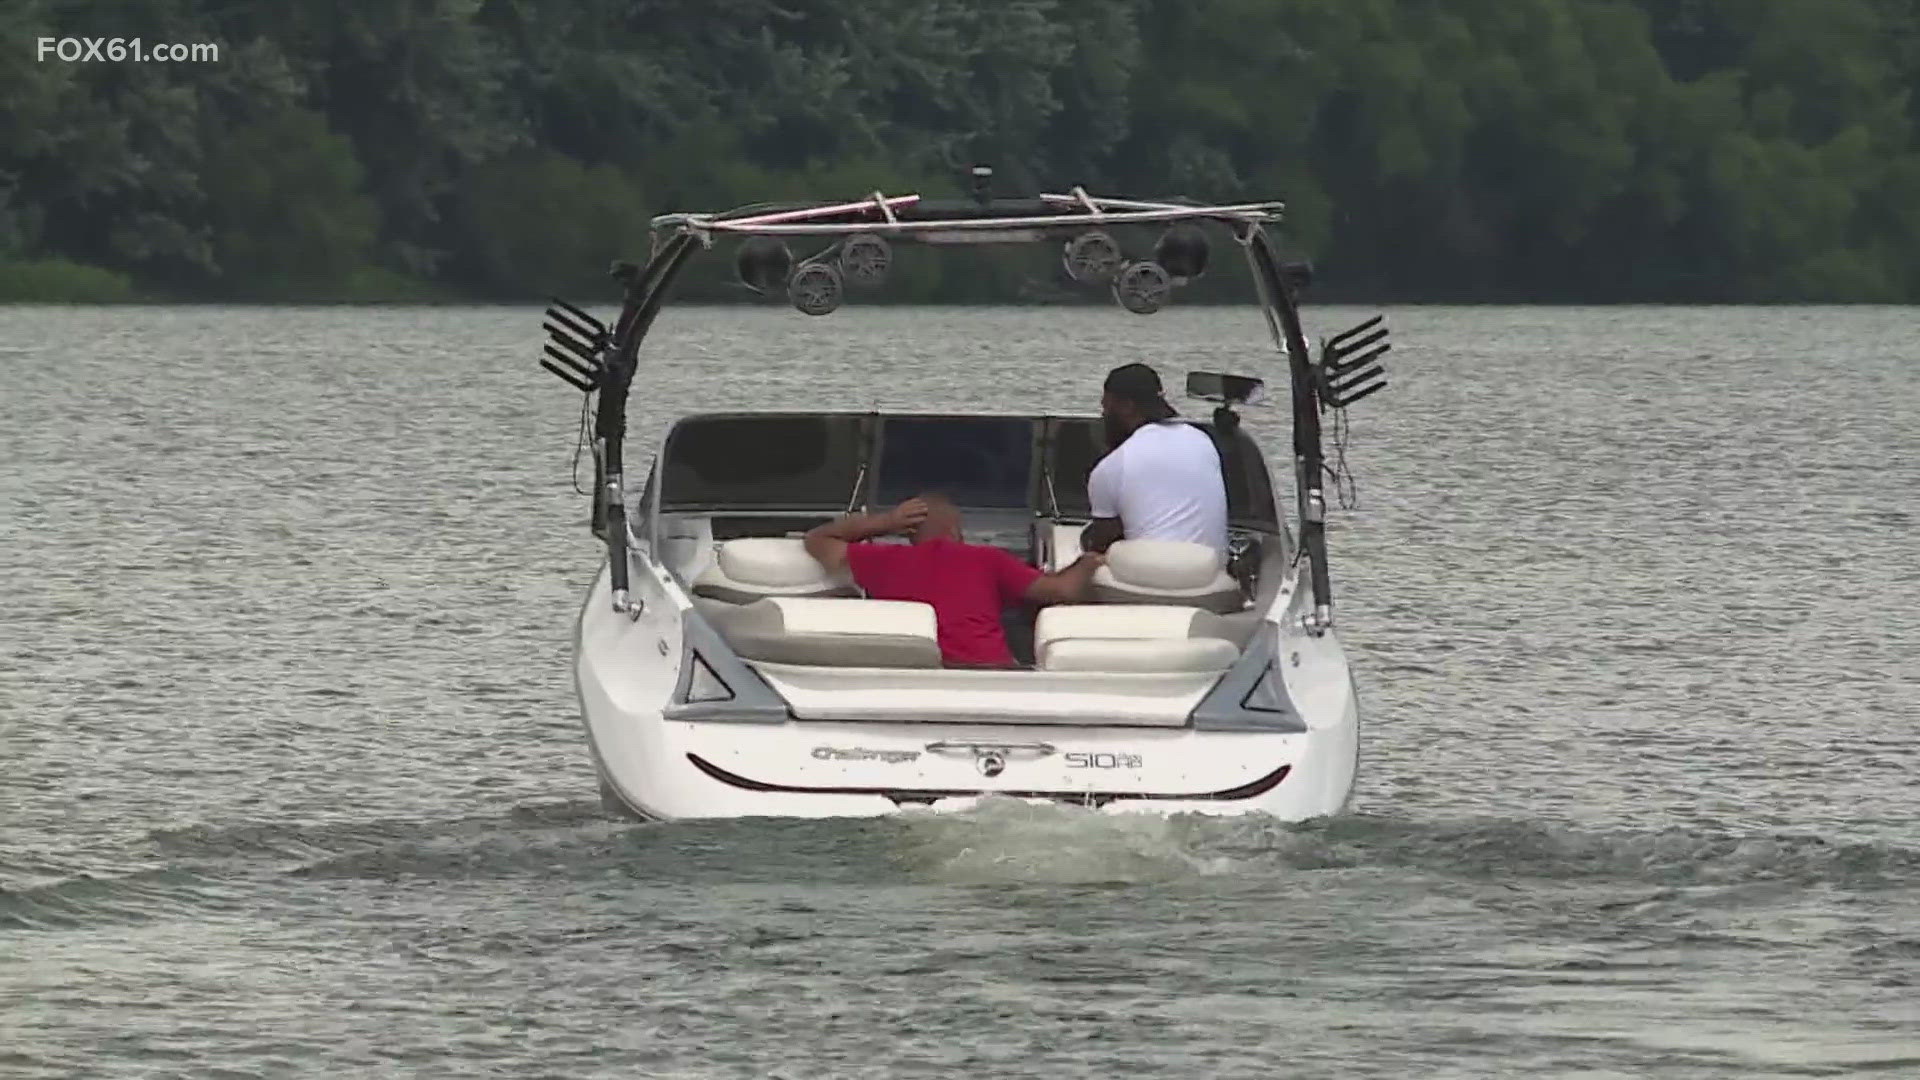 Heading out on the water this weekend? Officials are stressing the importance of watercraft safety and responsibility.